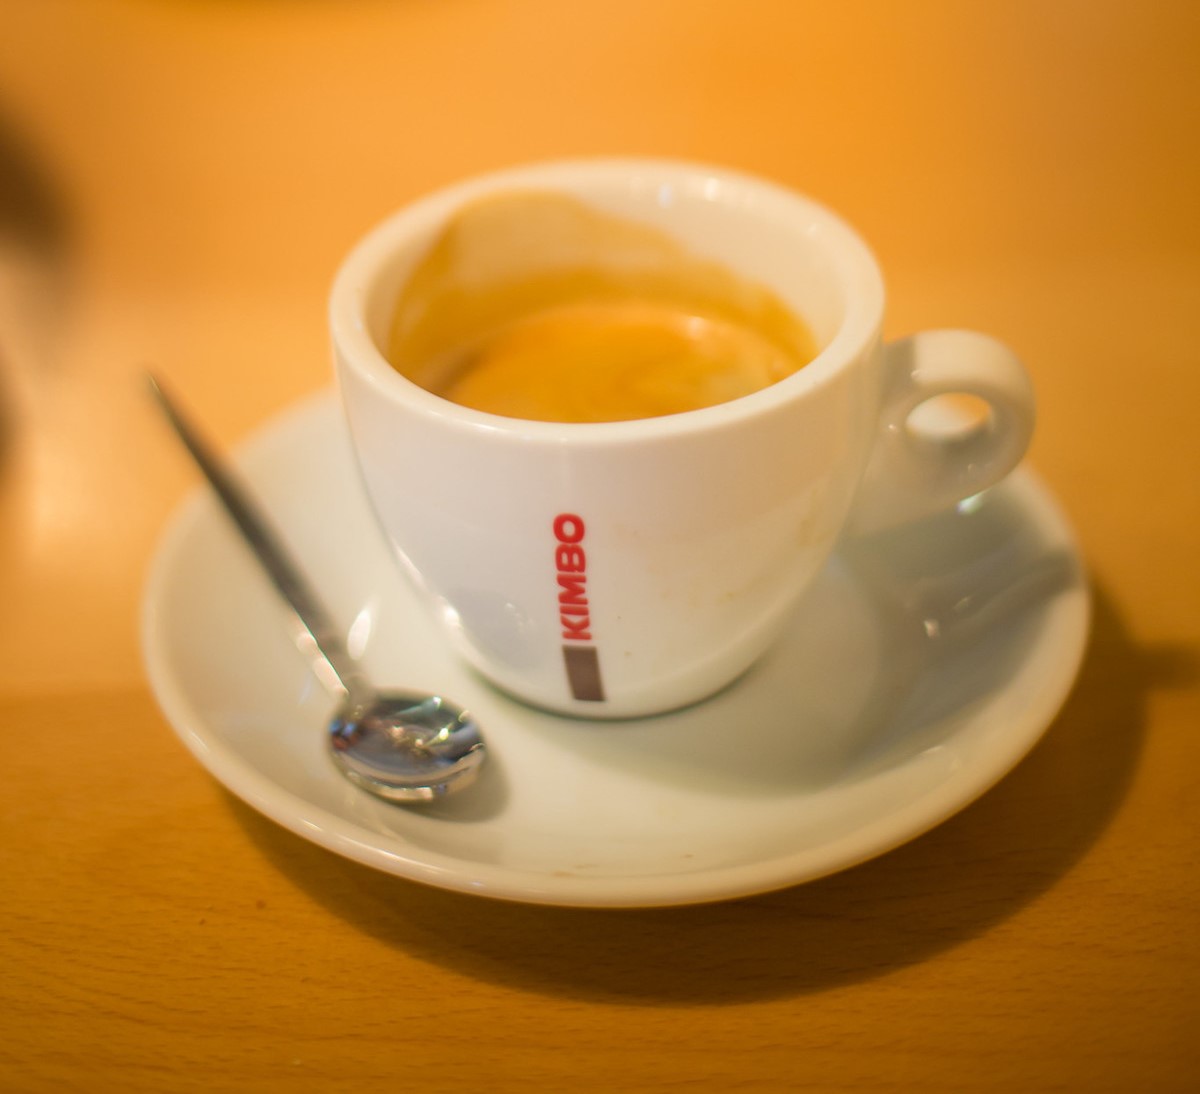 close up of a small white espresso cup with read letters on the side reading "Kimbo," a common coffee roaster found in Naples